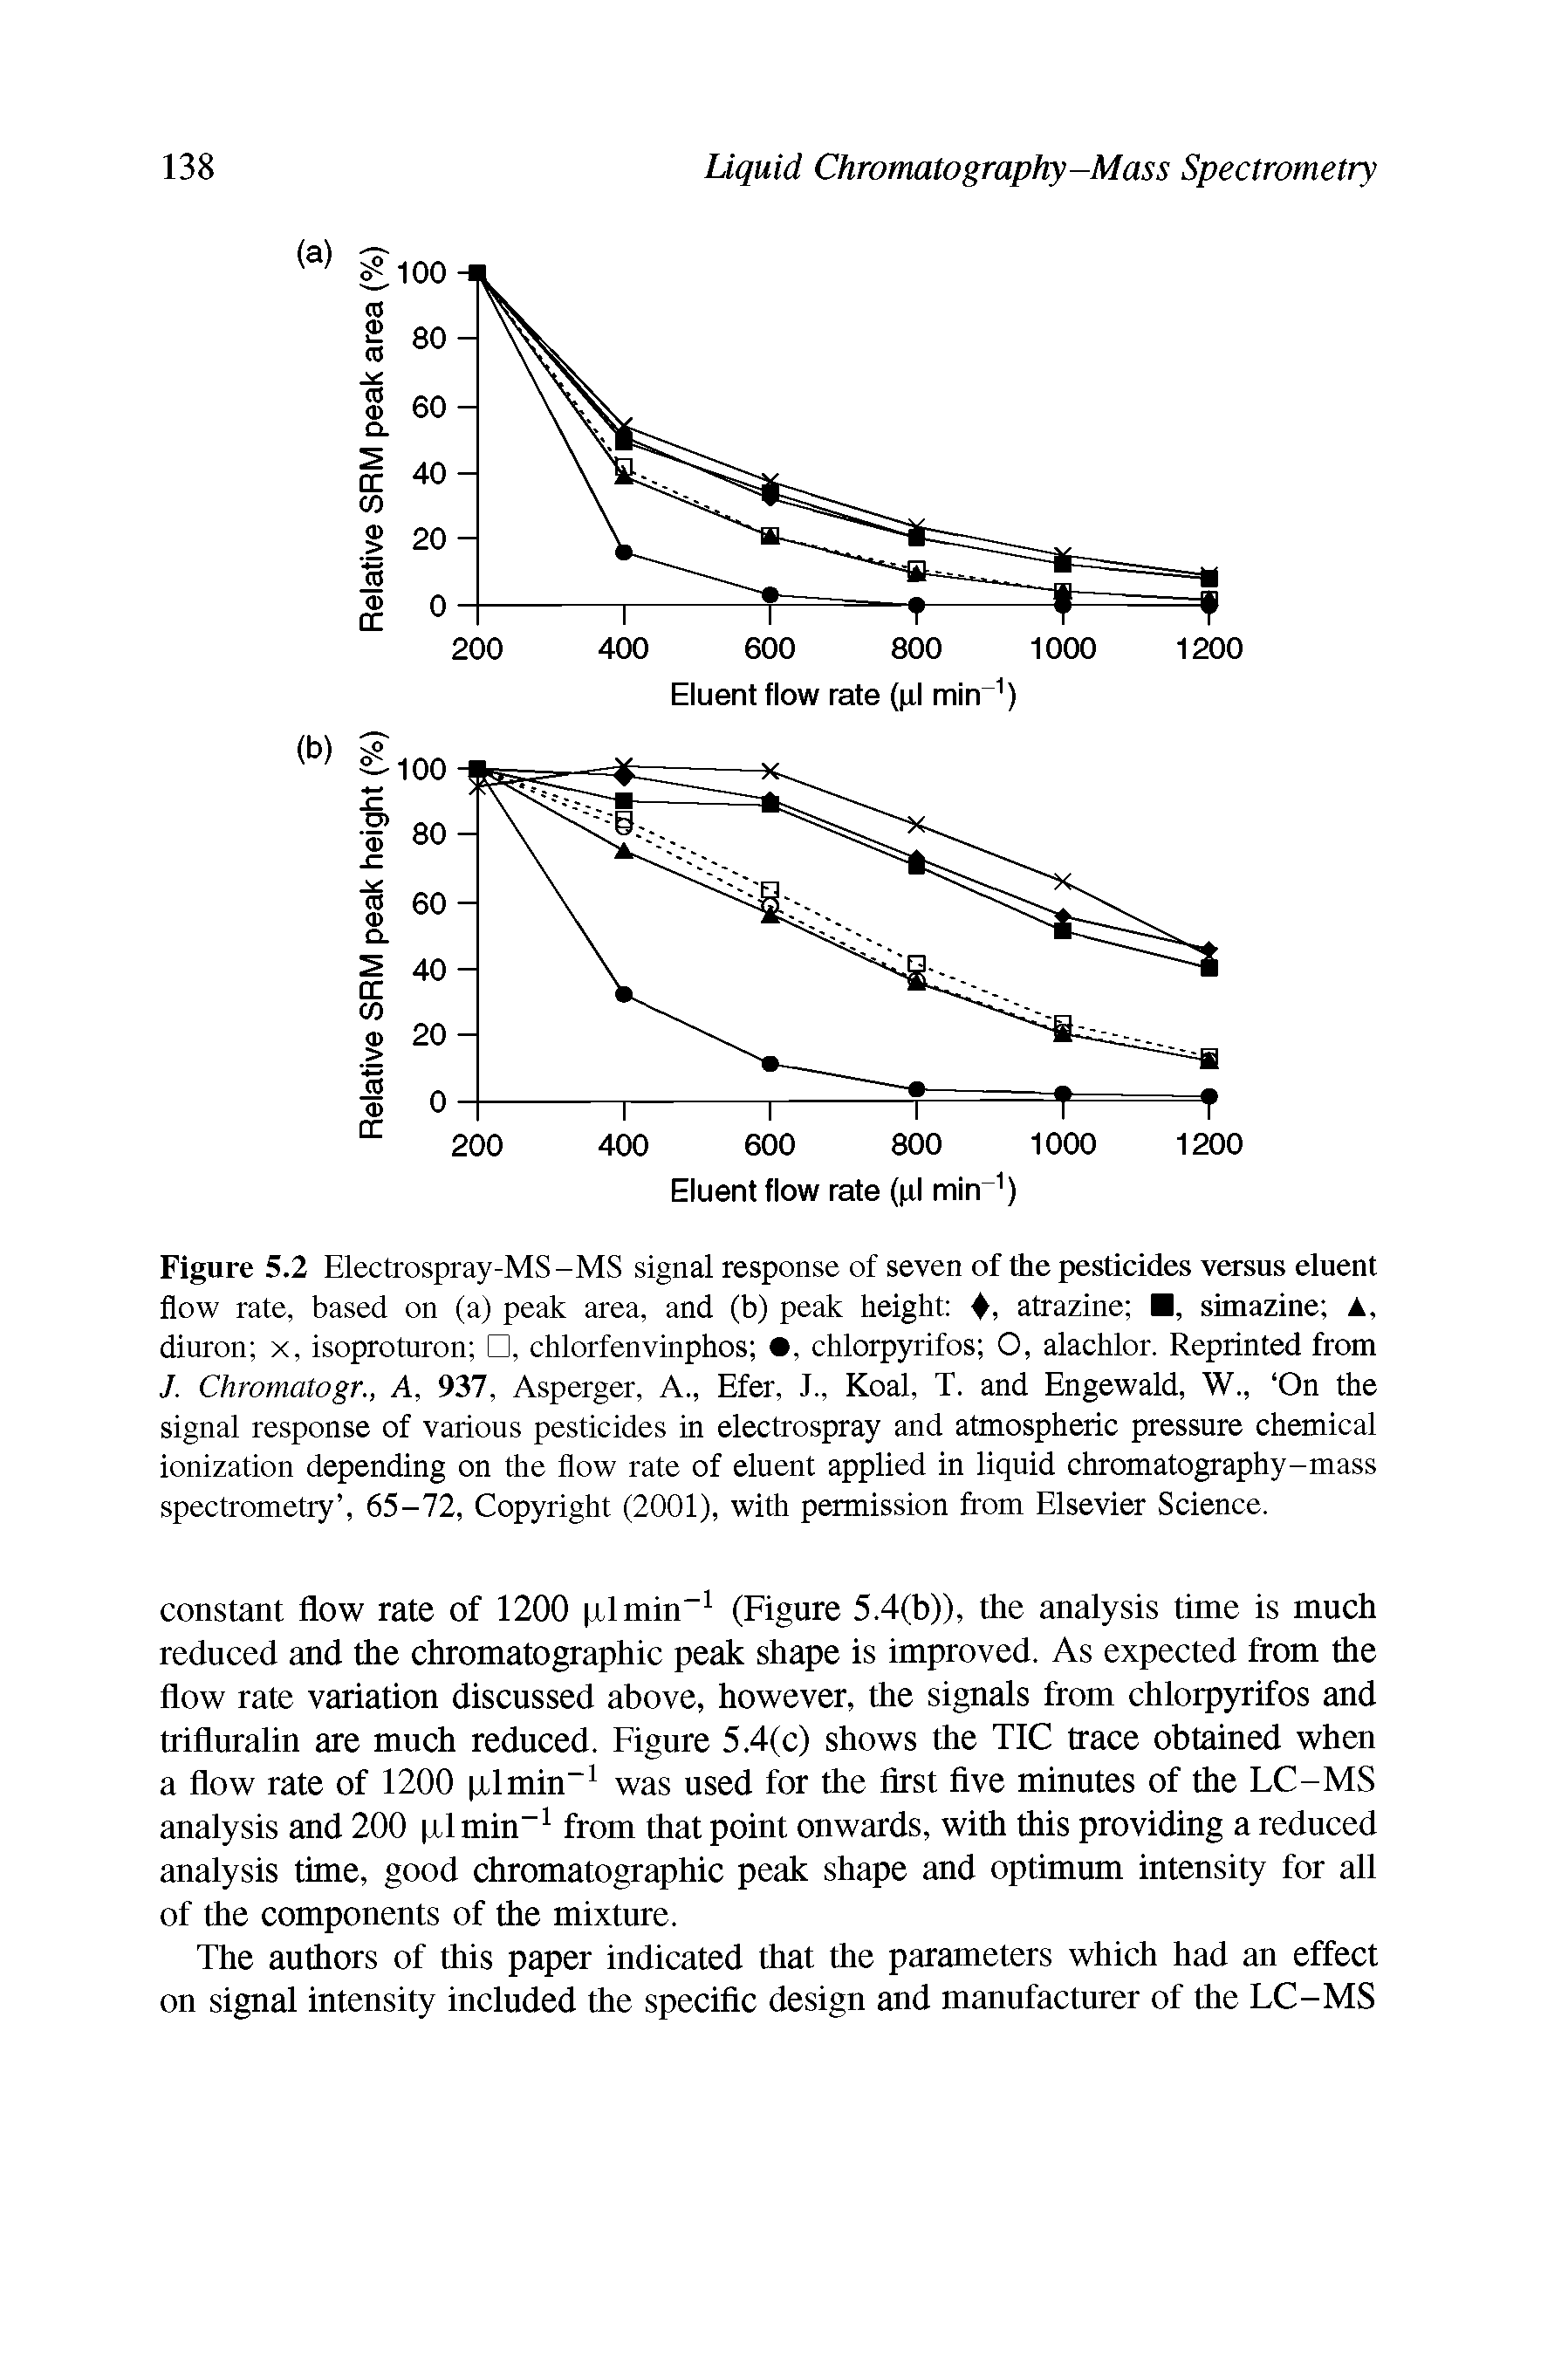 Figure 5.2 Electrospray-MS-MS signal response of seven of the pesticides versus eluent flow rate, based on (a) peak area, and (b) peak height , atrazine , simazine , diuron x, isoproturon , chlorfenvinphos , chlorpyrifos O, alachlor. Reprinted from 7. Chromatogr., A, 937, Asperger, A., Efer, J., Koal, T. and Engewald, W., On the signal response of various pesticides in electrospray and atmospheric pressure chemical ionization depending on the flow rate of eluent applied in liquid chromatography-mass spectrometry , 65-72, Copyright (2001), with permission from Elsevier Science.